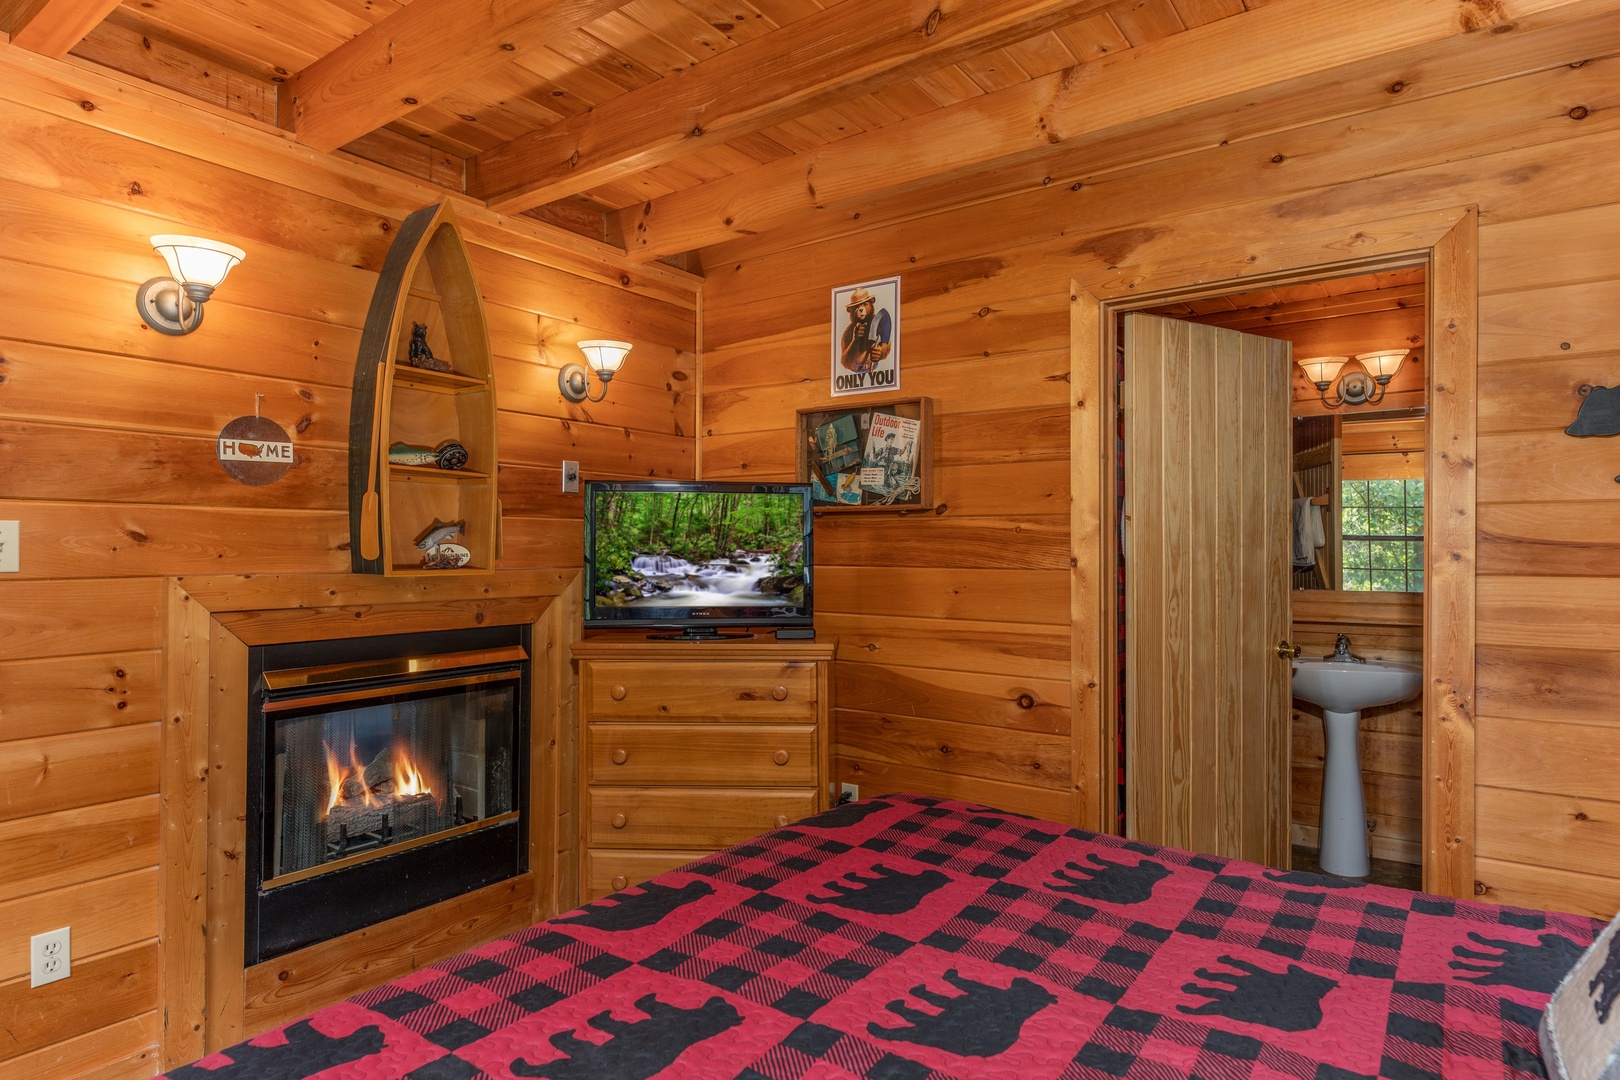 Fireplace, TV, and a dresser in the bedroom at Away From it All, a 1 bedroom cabin rental located in Pigeon Forge